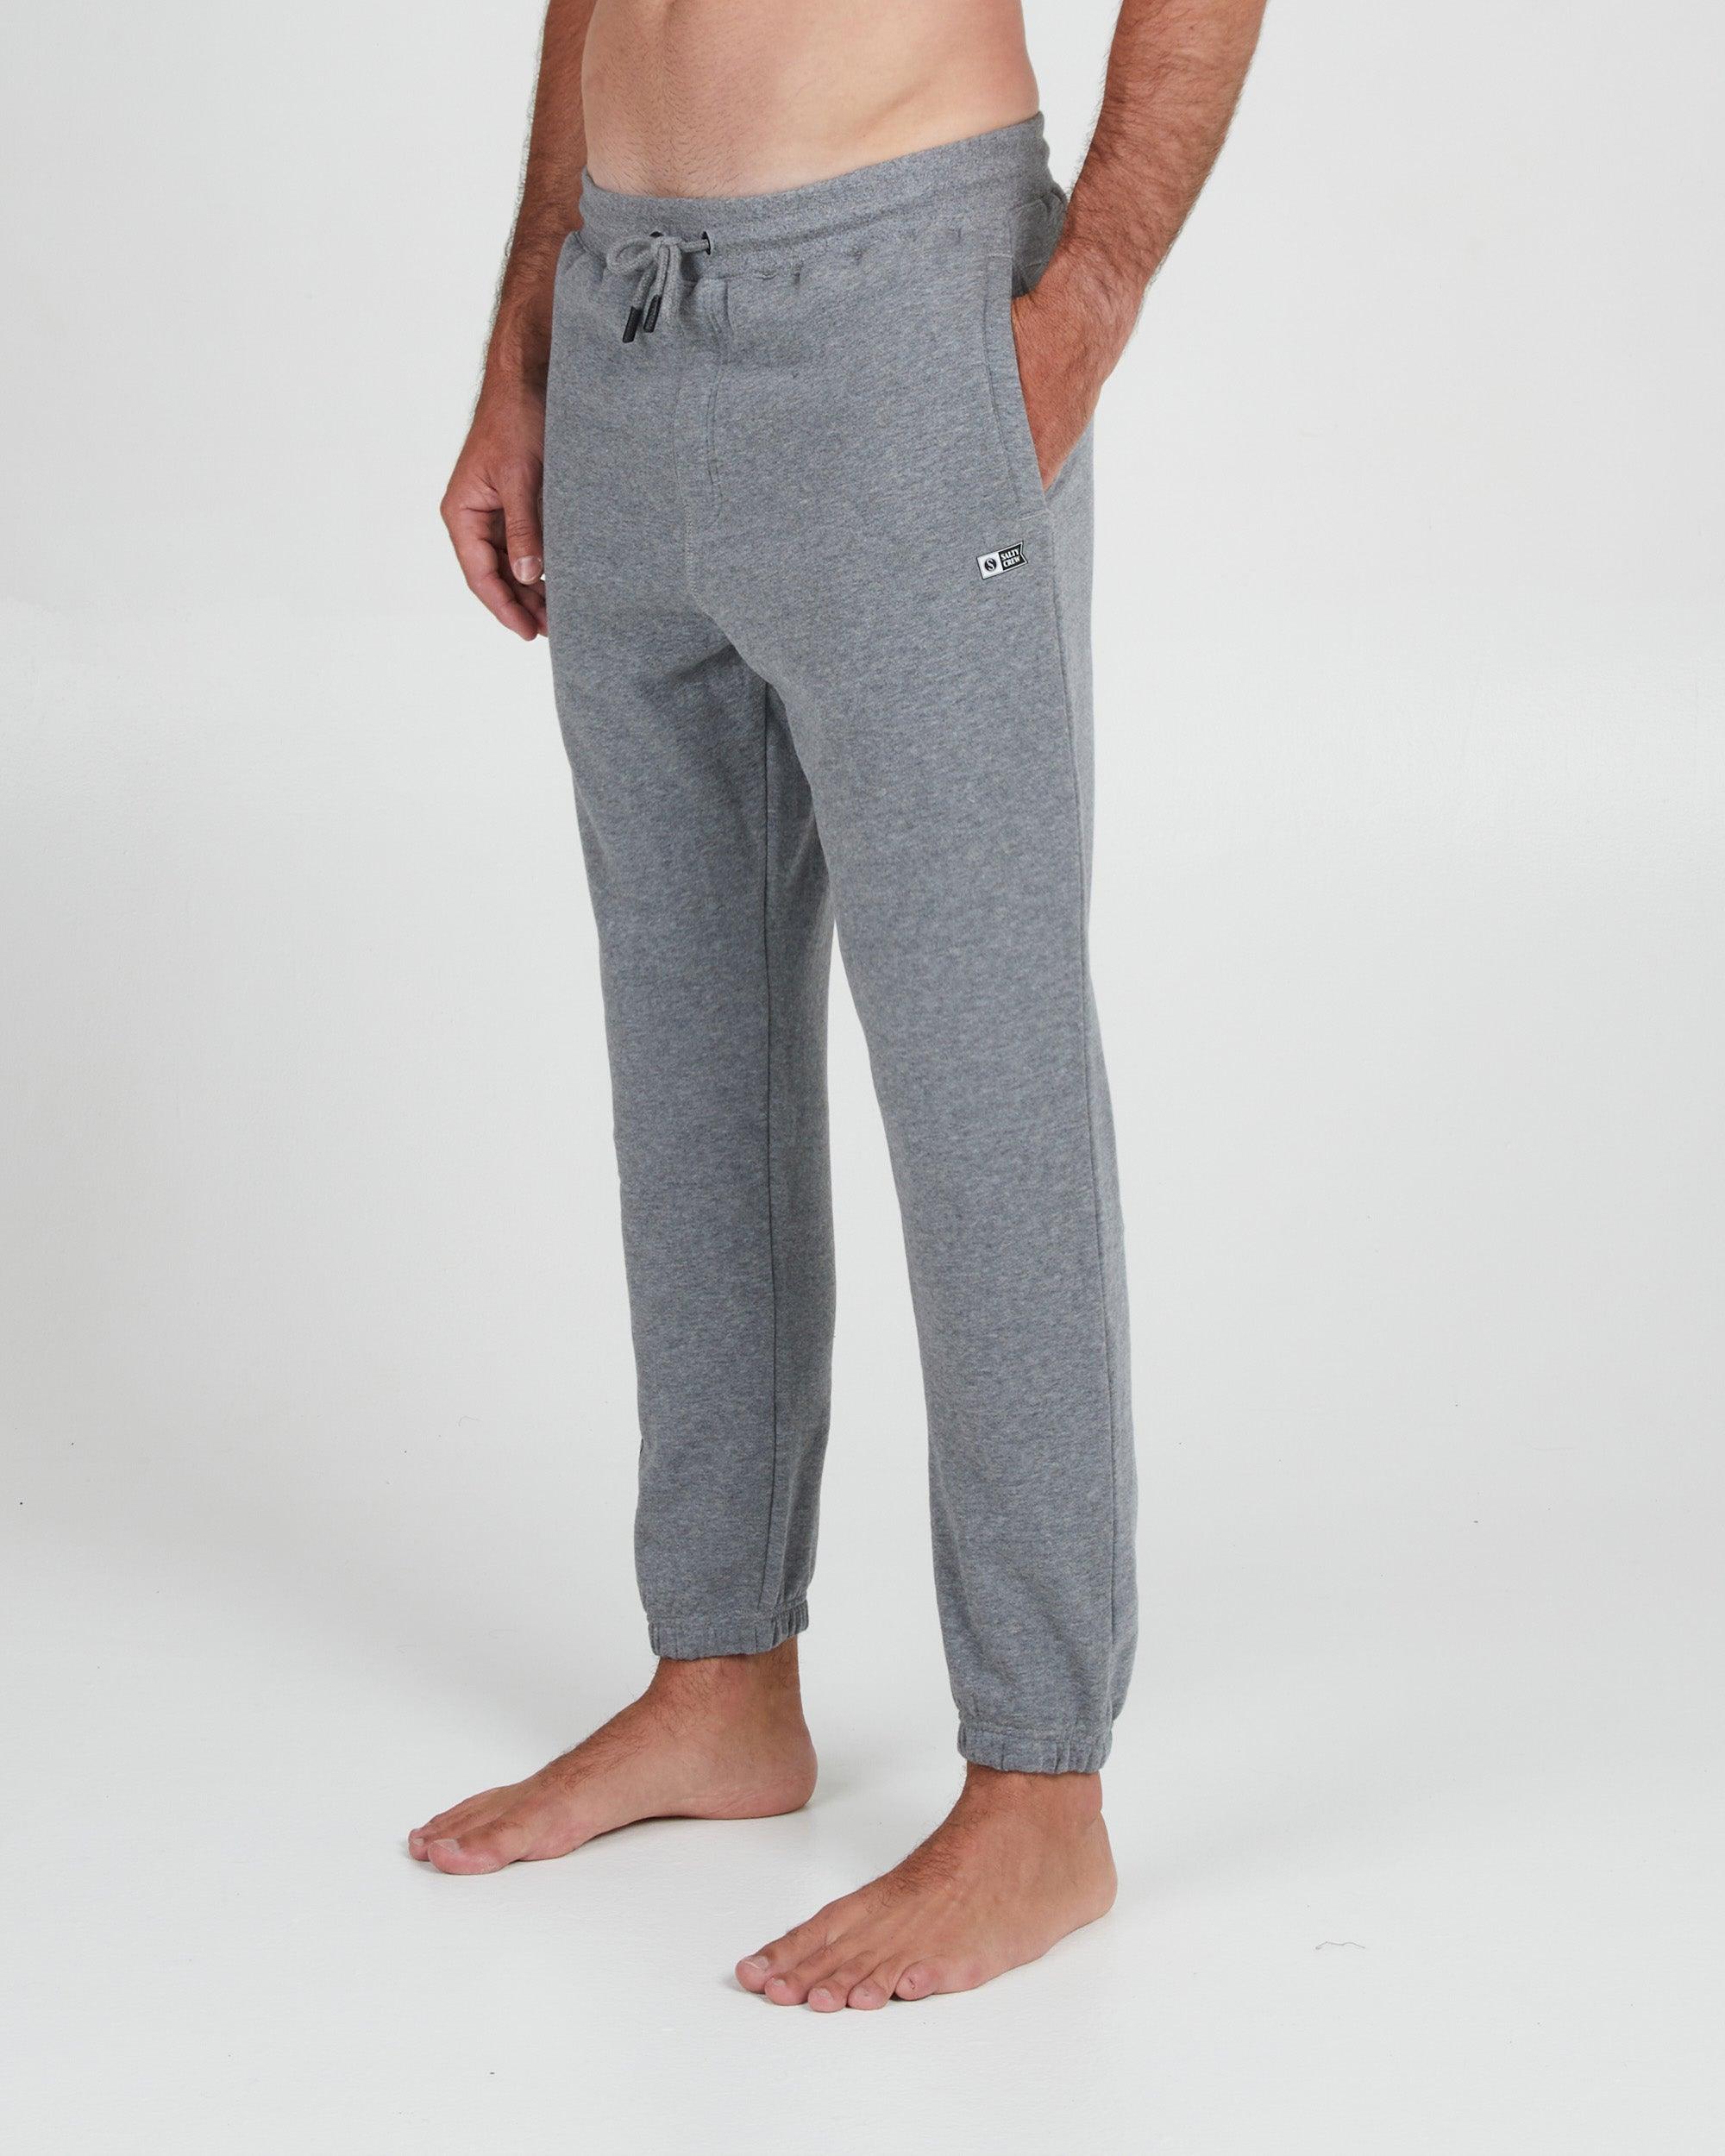 Dockside Sweatpant - Grey/Heather - Purpose-Built / Home of the Trades